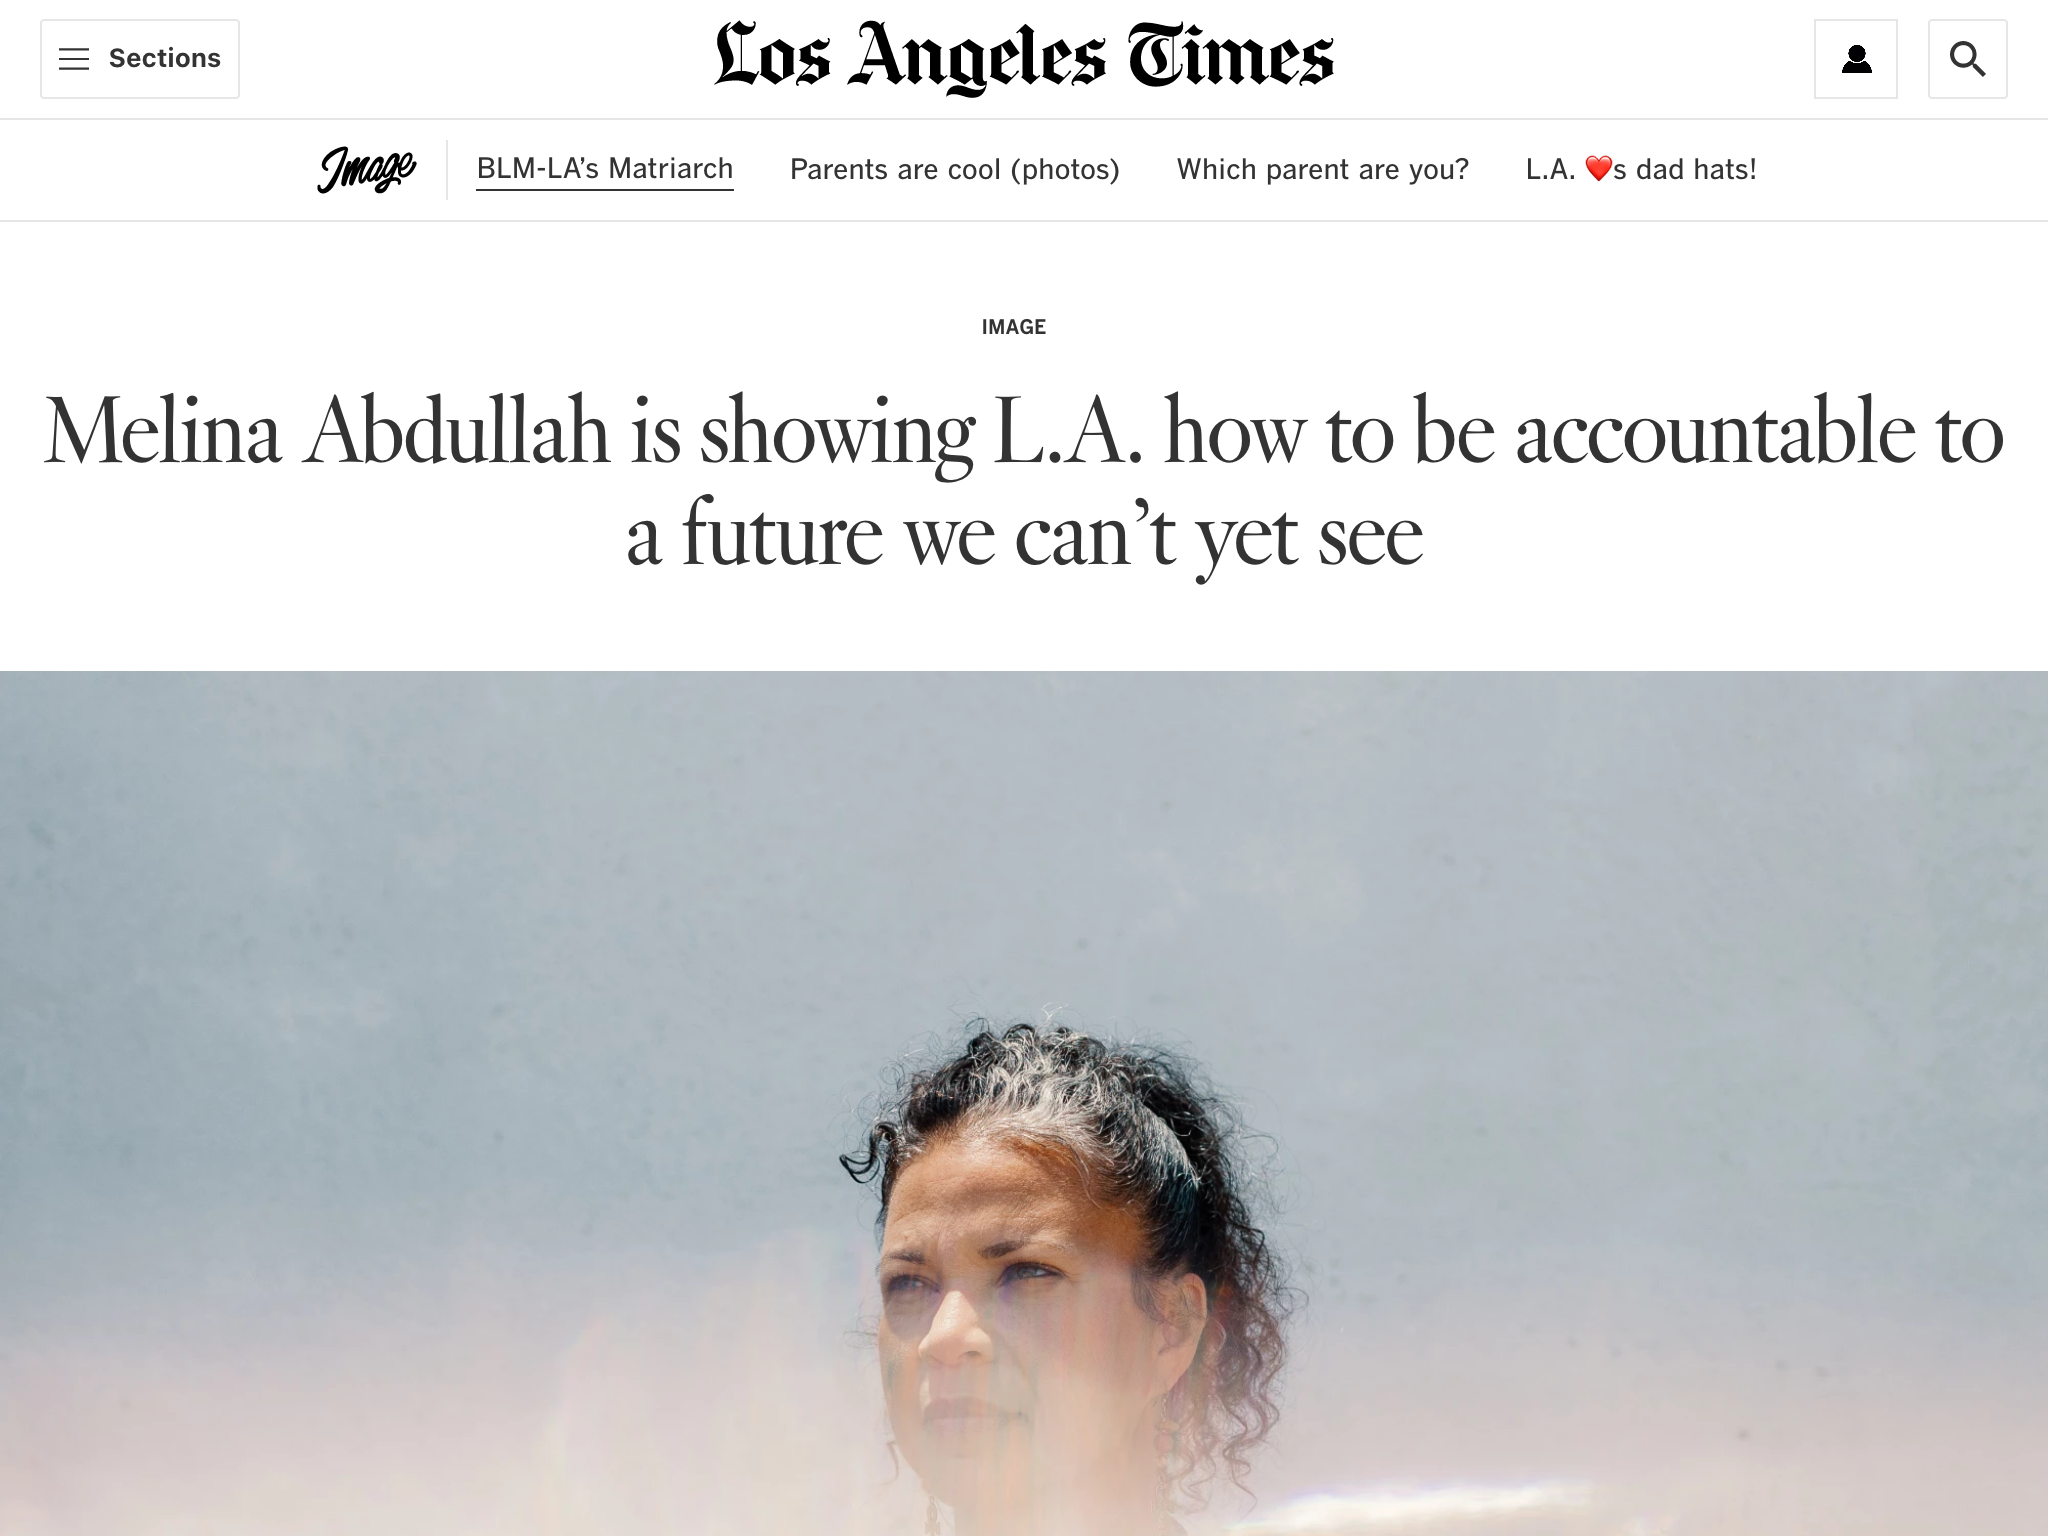 A screenshot of an L.A. Times story from Image magazine featuring a Contextual Navigation.